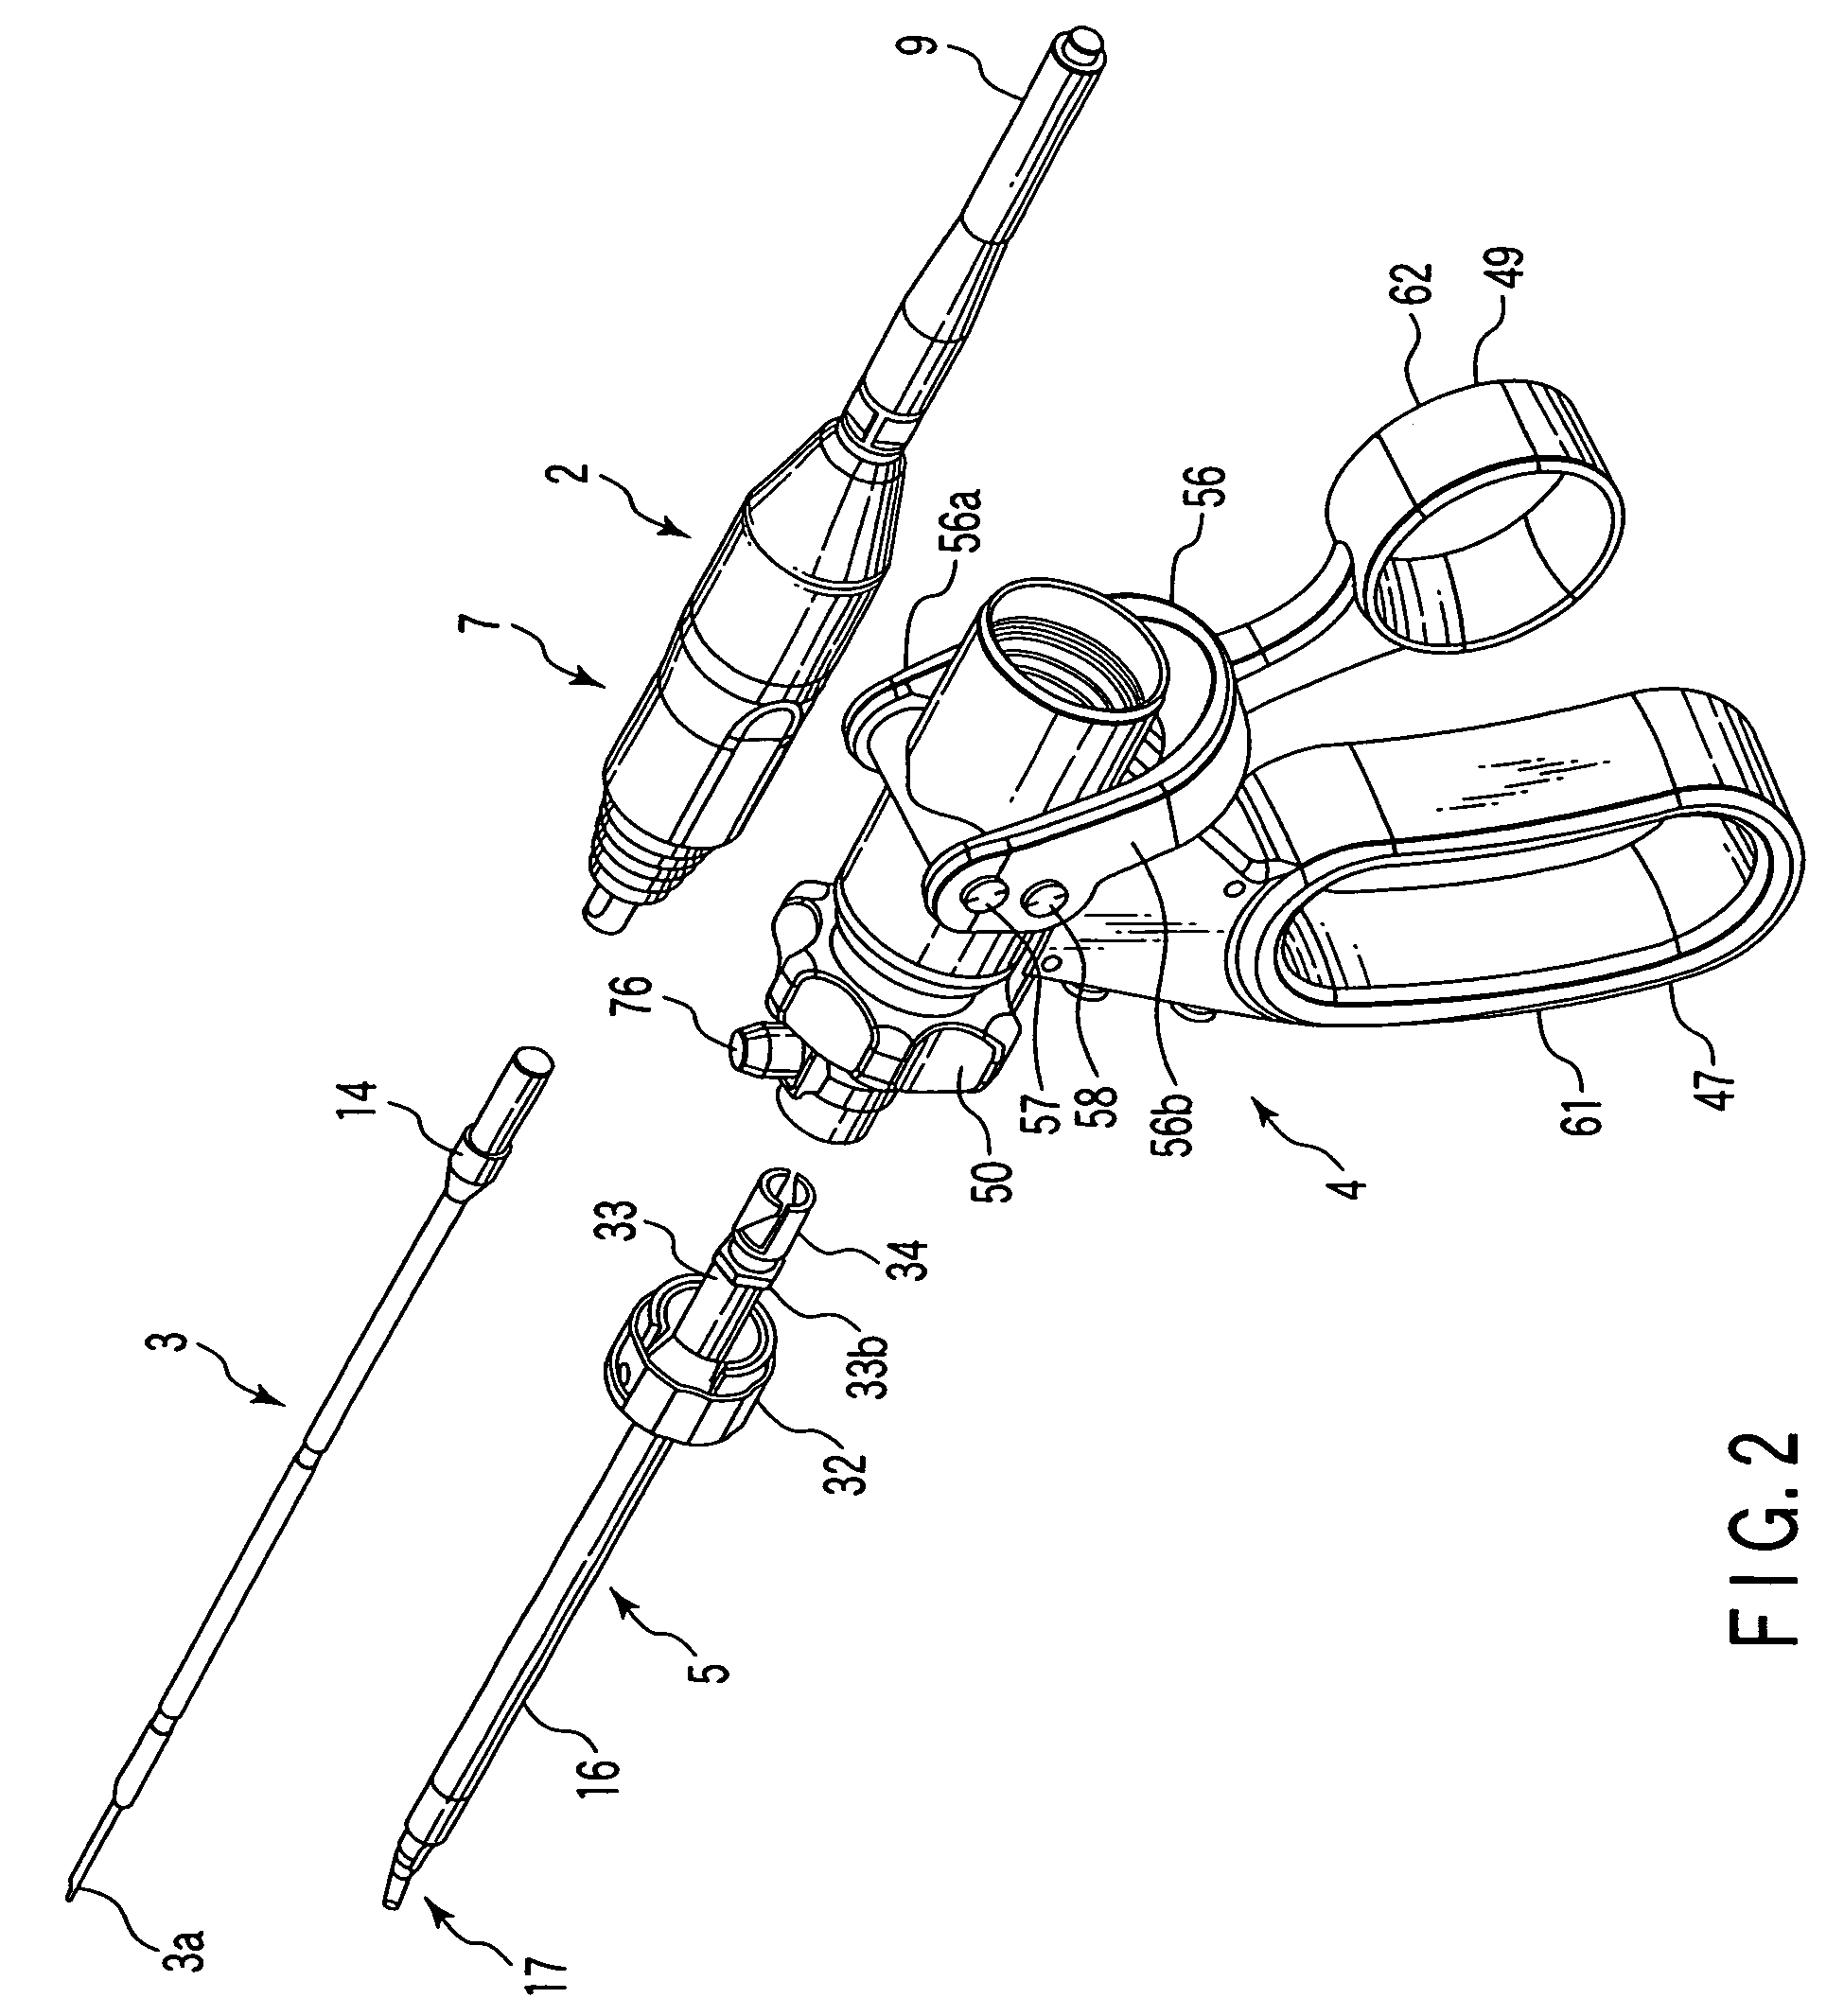 Surgical operating apparatus